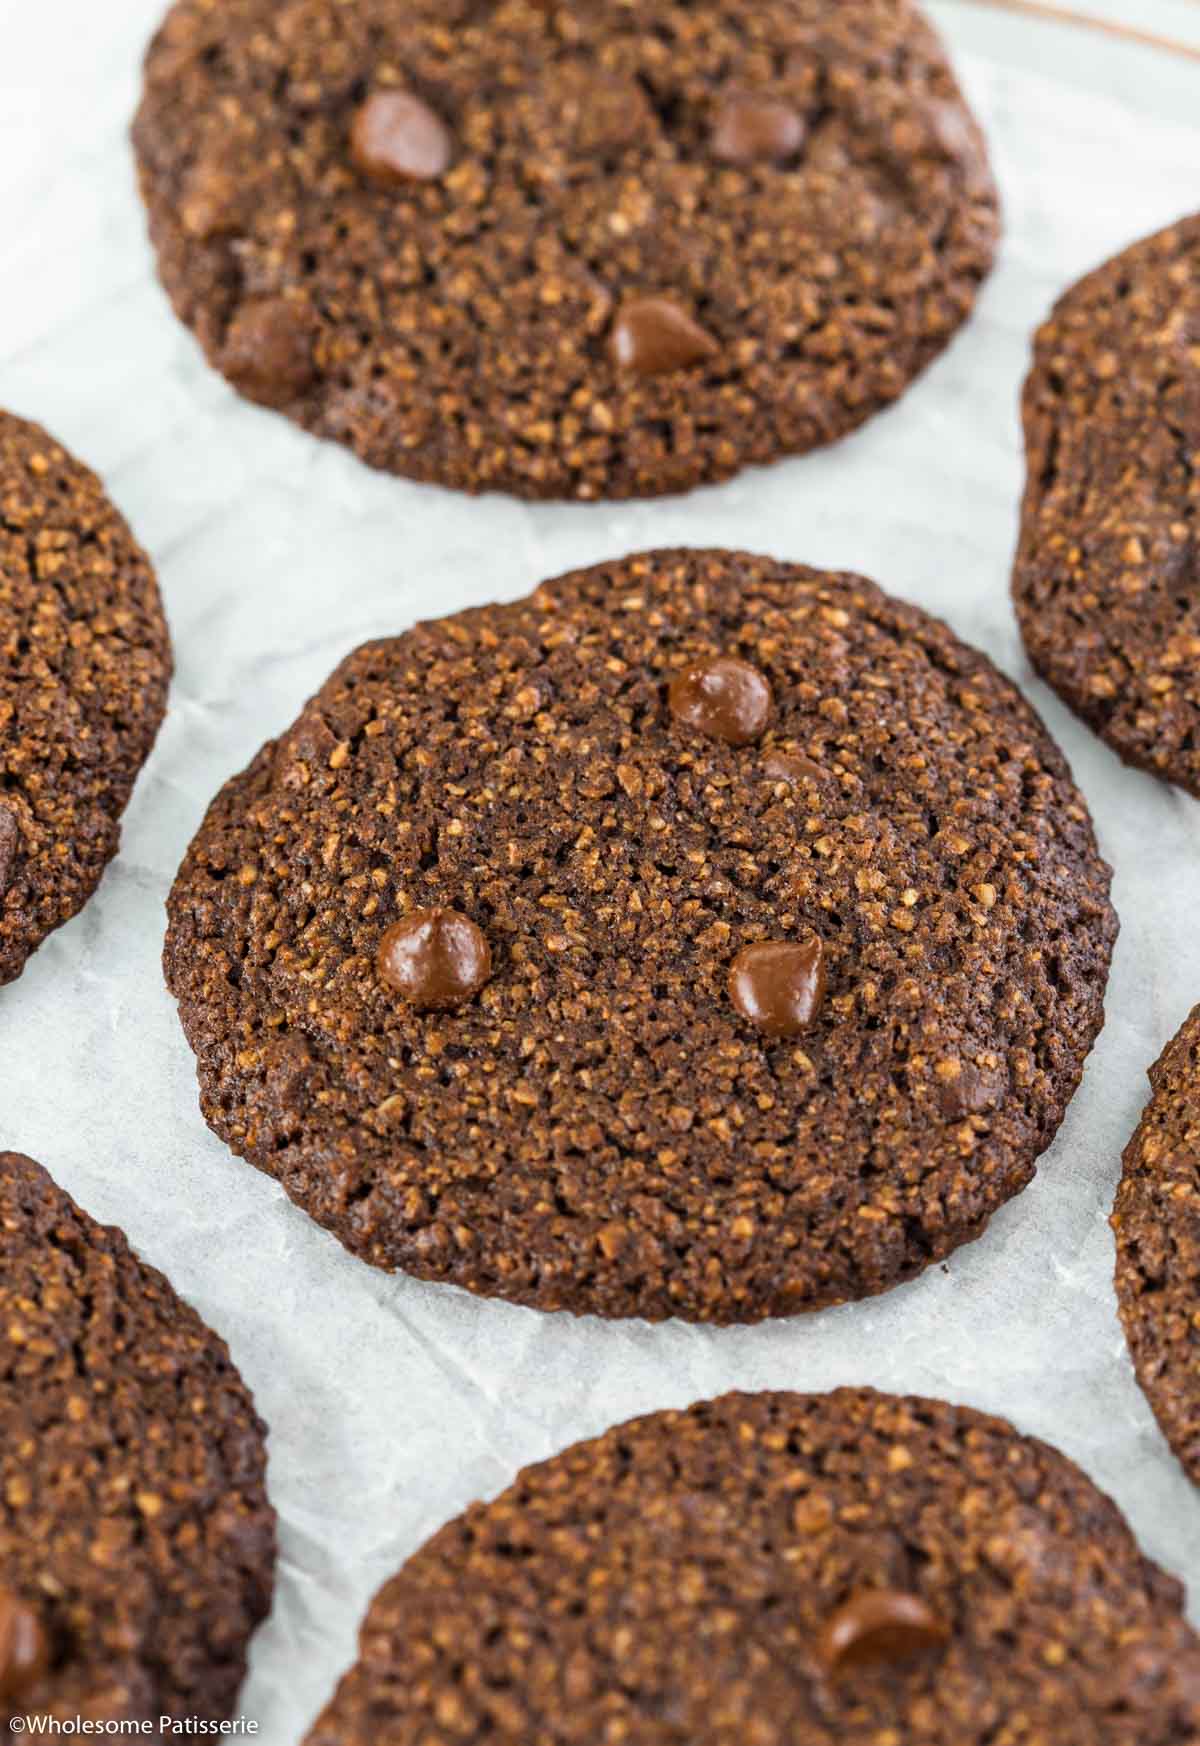 Close up image showing texture and chocolate chips in the baked cookies